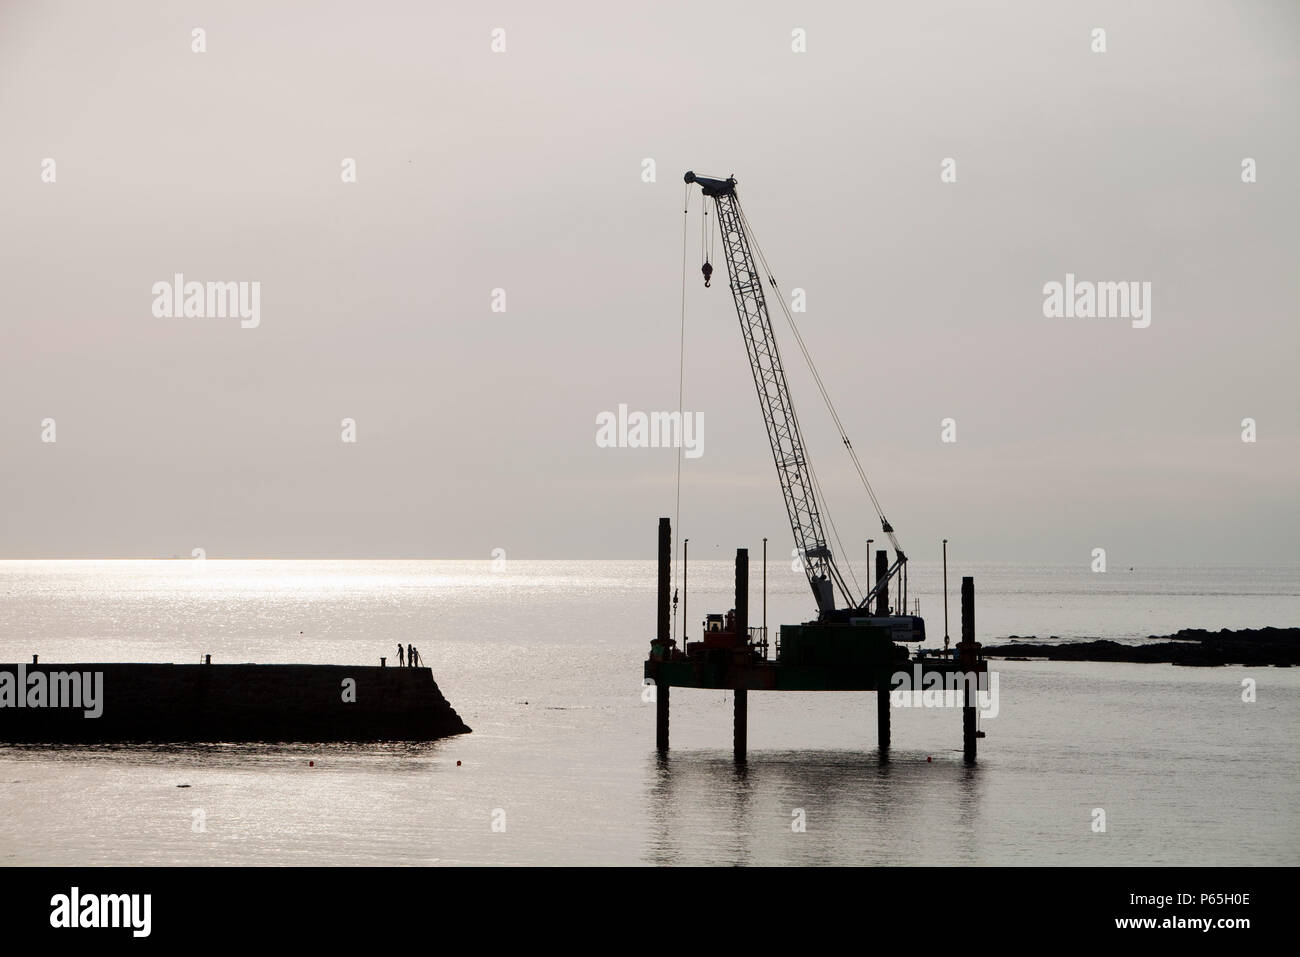 A crane on a platform off Sennen cove Harbour in Cornwall, UK Stock Photo